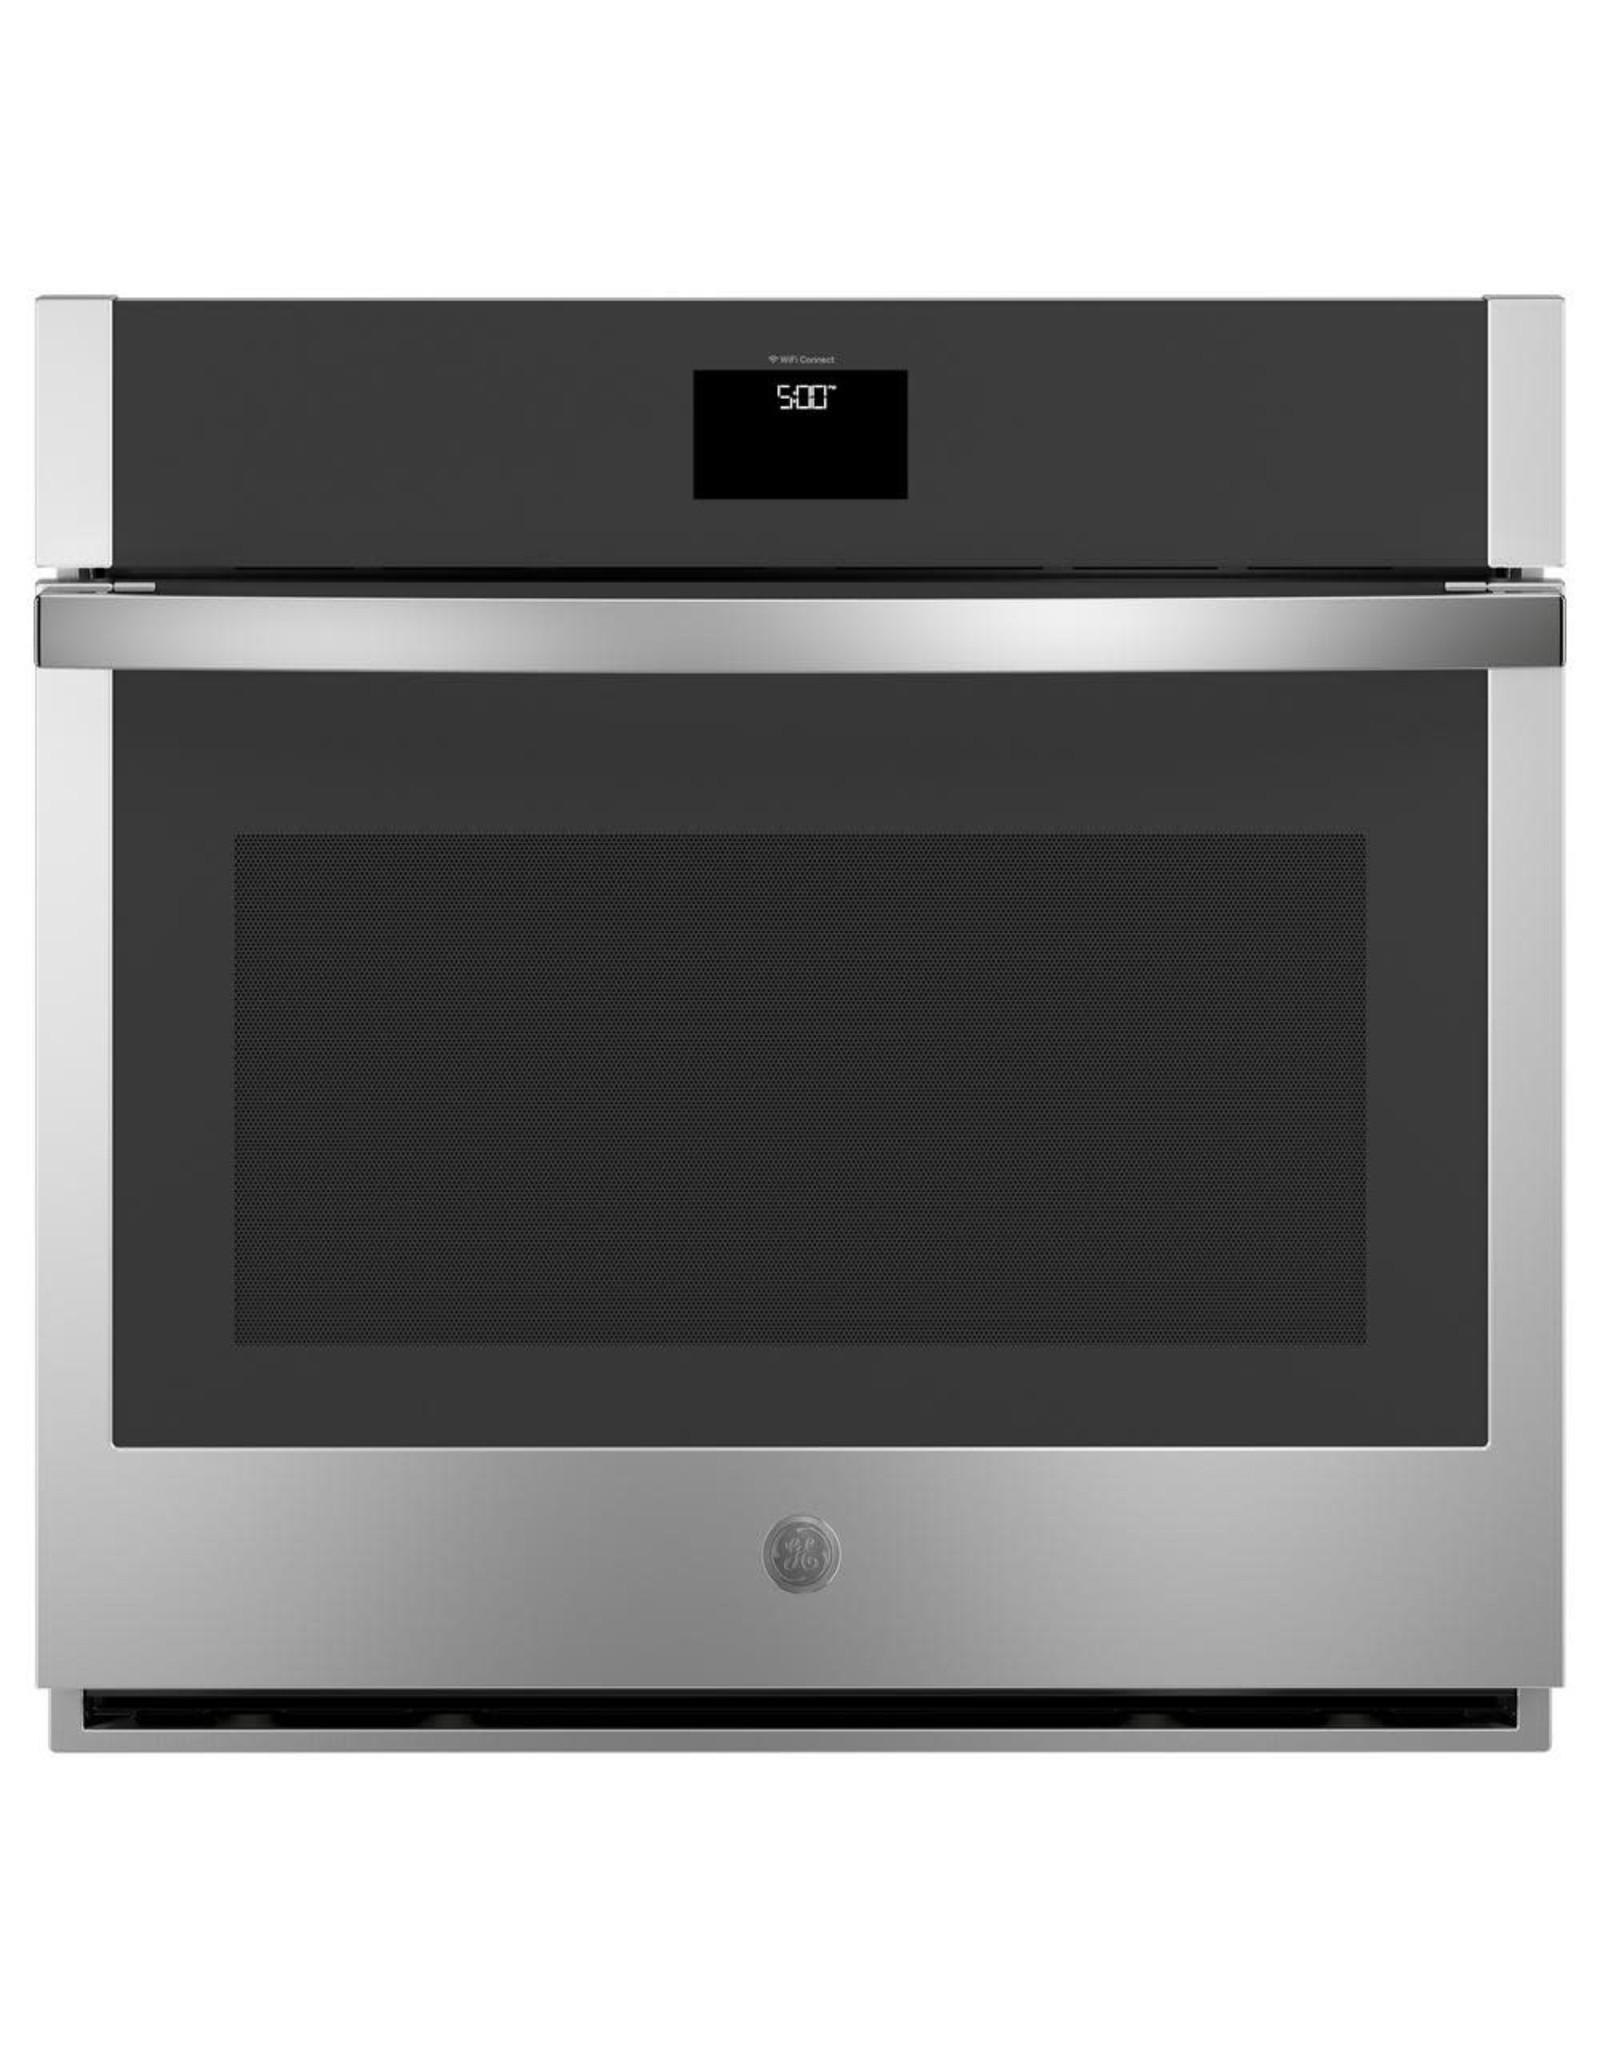 GE JTS5000SNSS 30 in. 5.0 cu. ft. Smart Single Electric Wall Oven with Self-Cleaning Convection in Stainless Steel